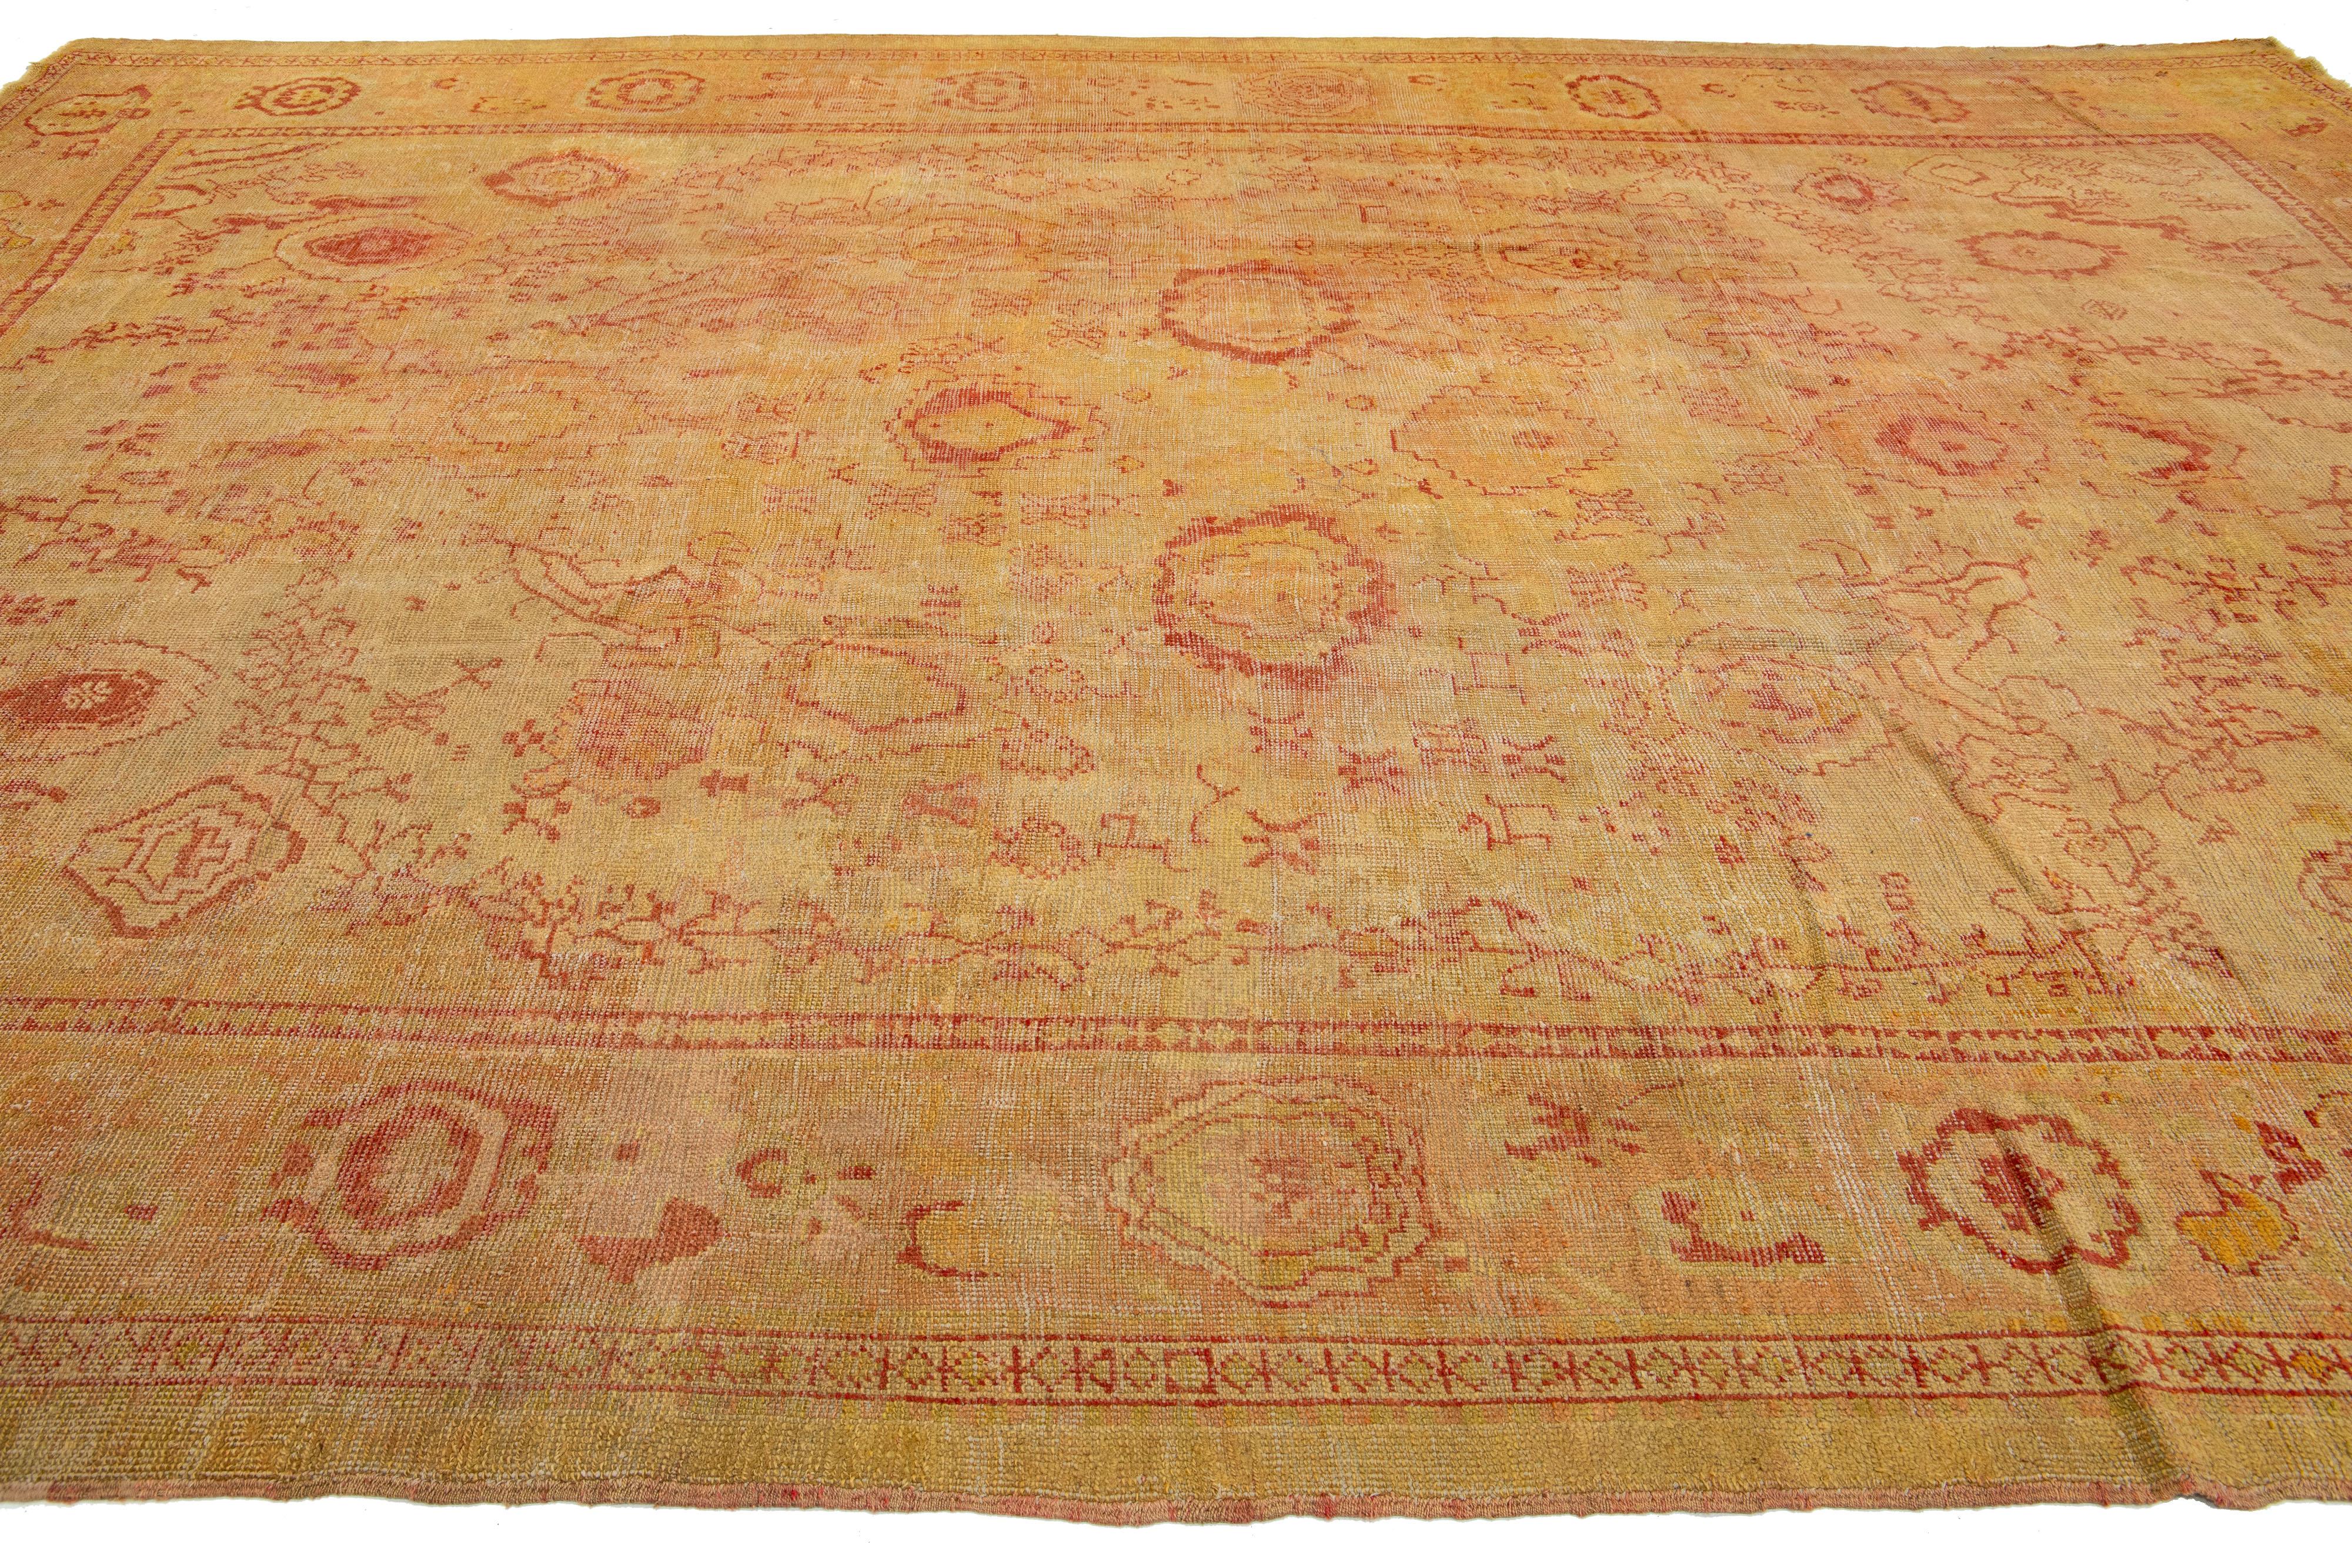 20th Century 19th. C. Turkish Oushak Wool Rug In Tan with Allover Floral Design For Sale